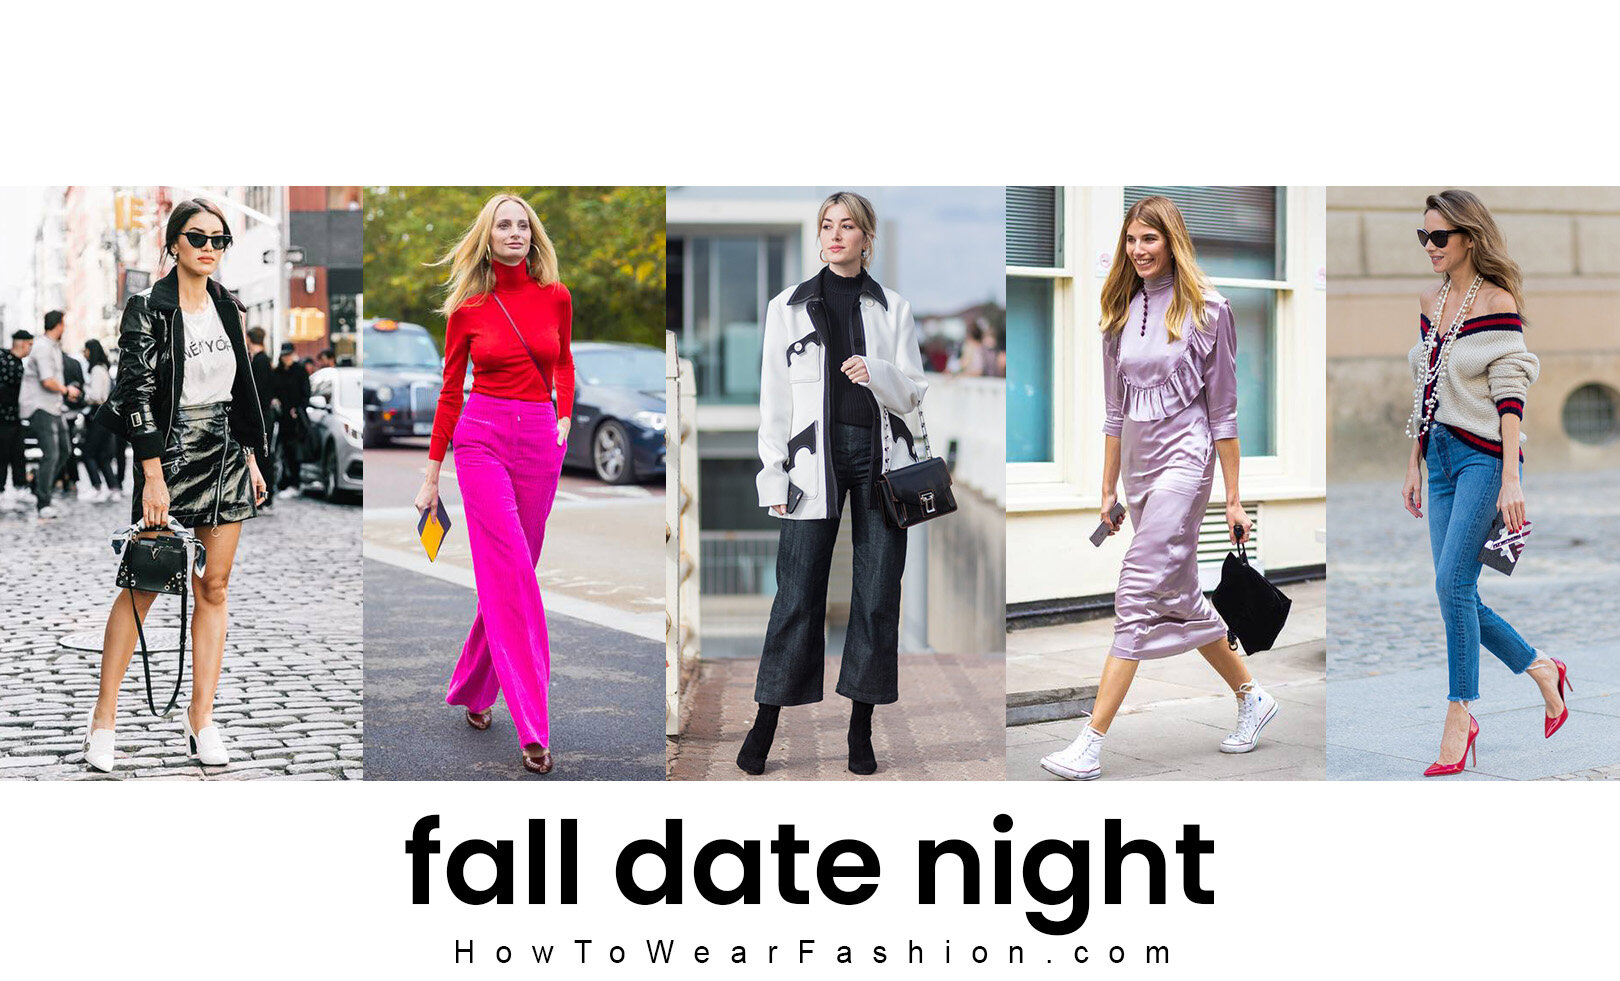 What to Wear for Date Night, According to a Stylist